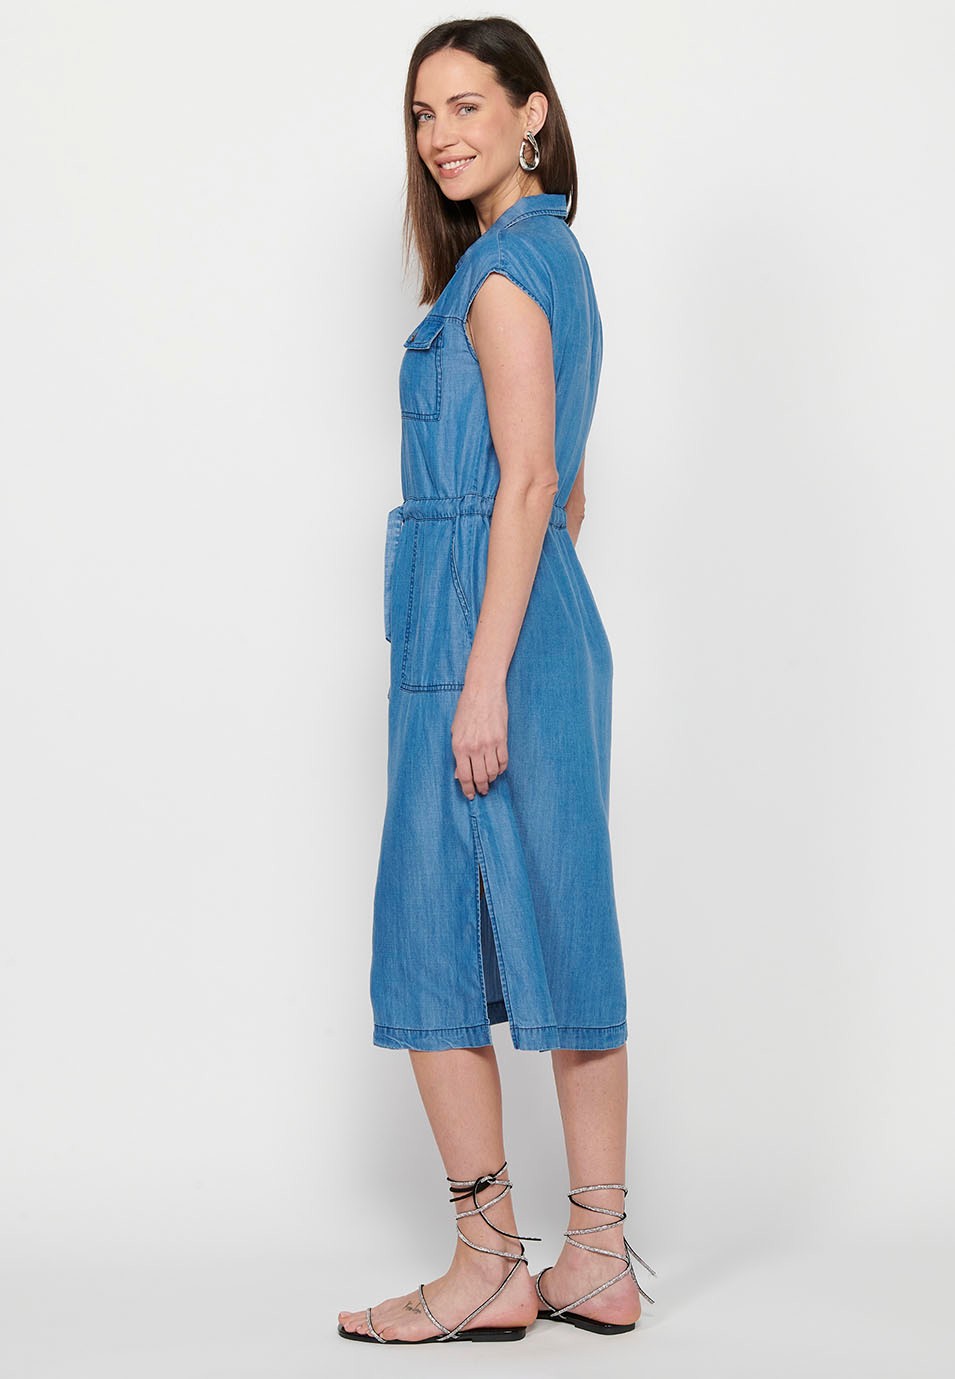 Women's Sleeveless Shirt Style Long Dress with Adjustable Waist with Drawstring and Button Front Closure in Blue 5